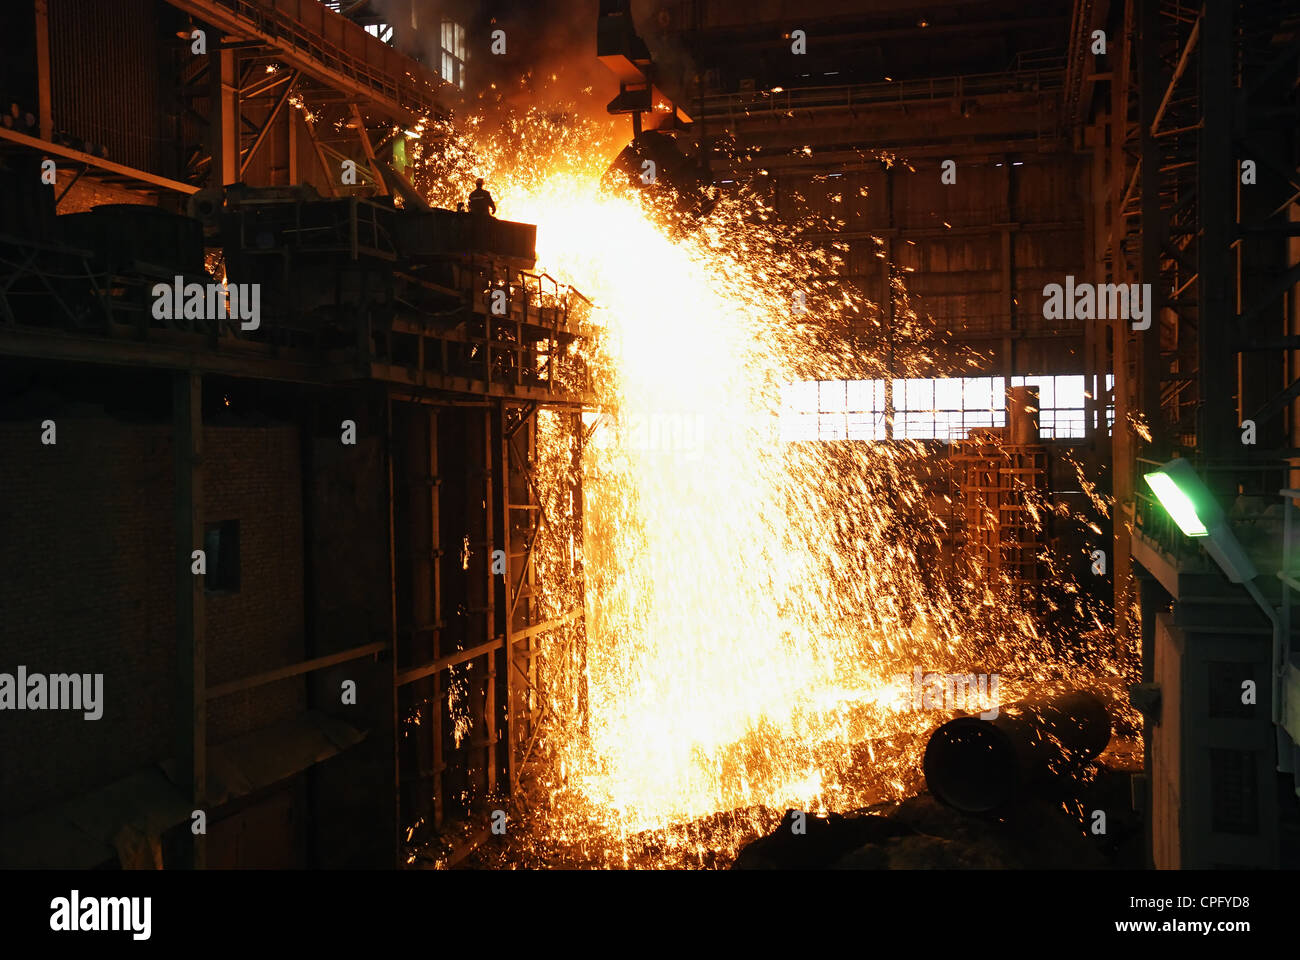 smelting of the metal in the foundry Stock Photo